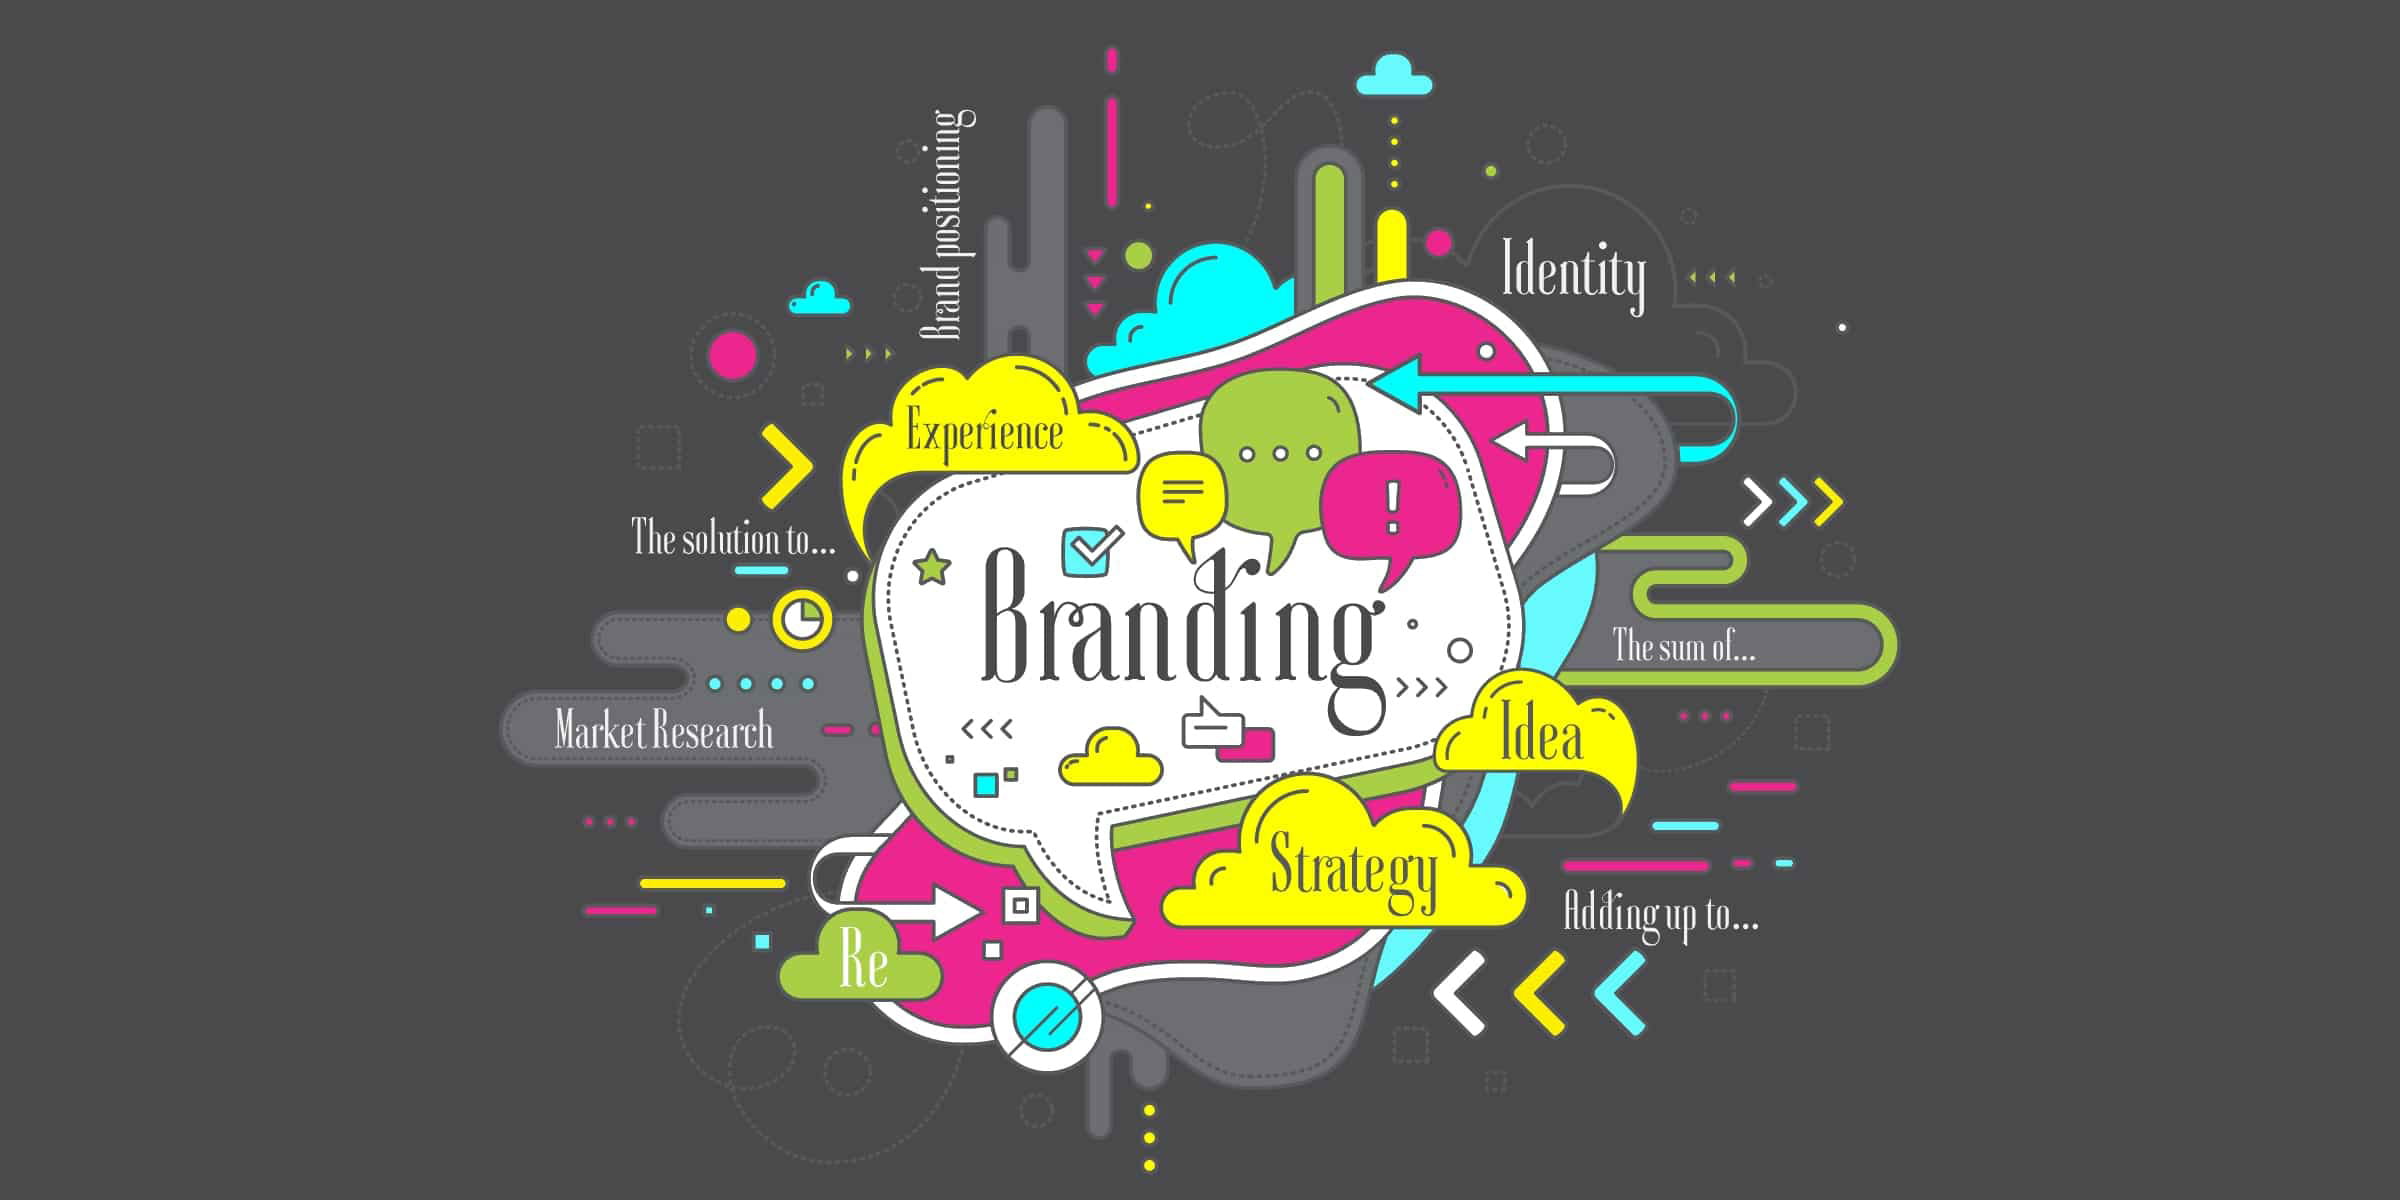 What is branding in Dubai, as specified in the advertising business, and why is it important to do advertising and marketing in Dubai?